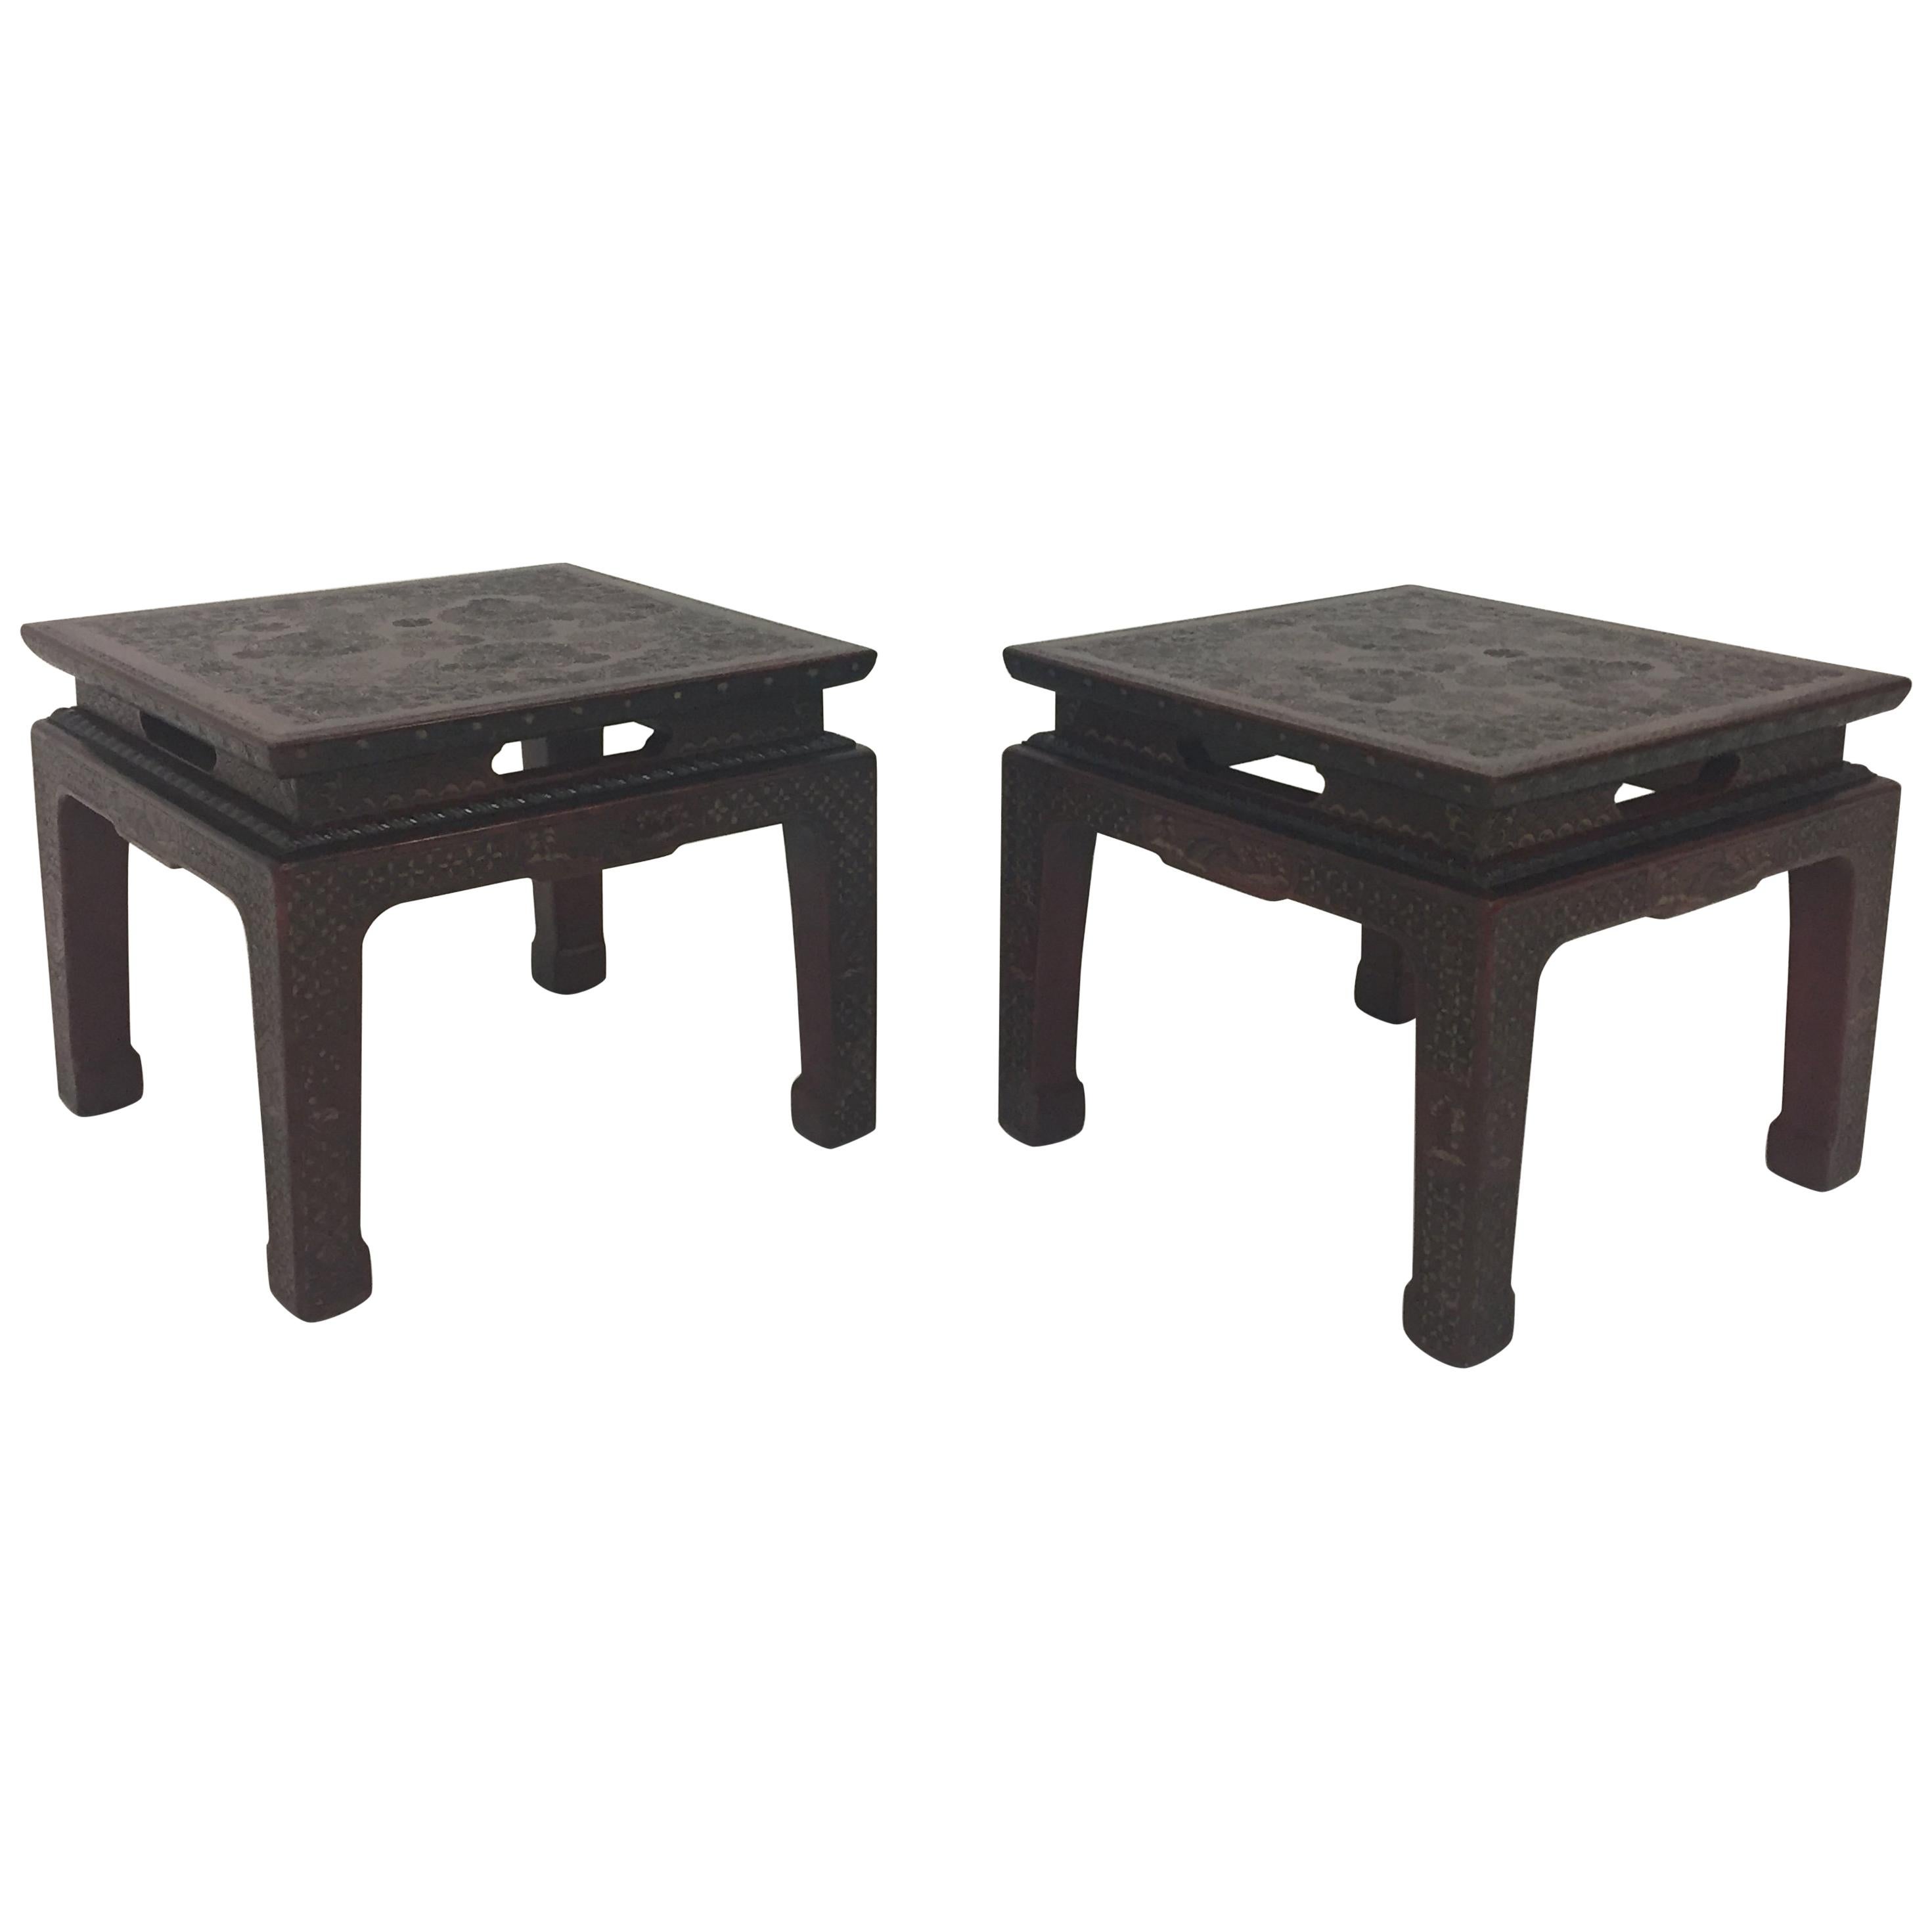 A gorgeous textured encised gesso over wood pair of end or side tables in a deep burgundy with intricate floral and geometric decoration and stunning Chinese sculpted legs.